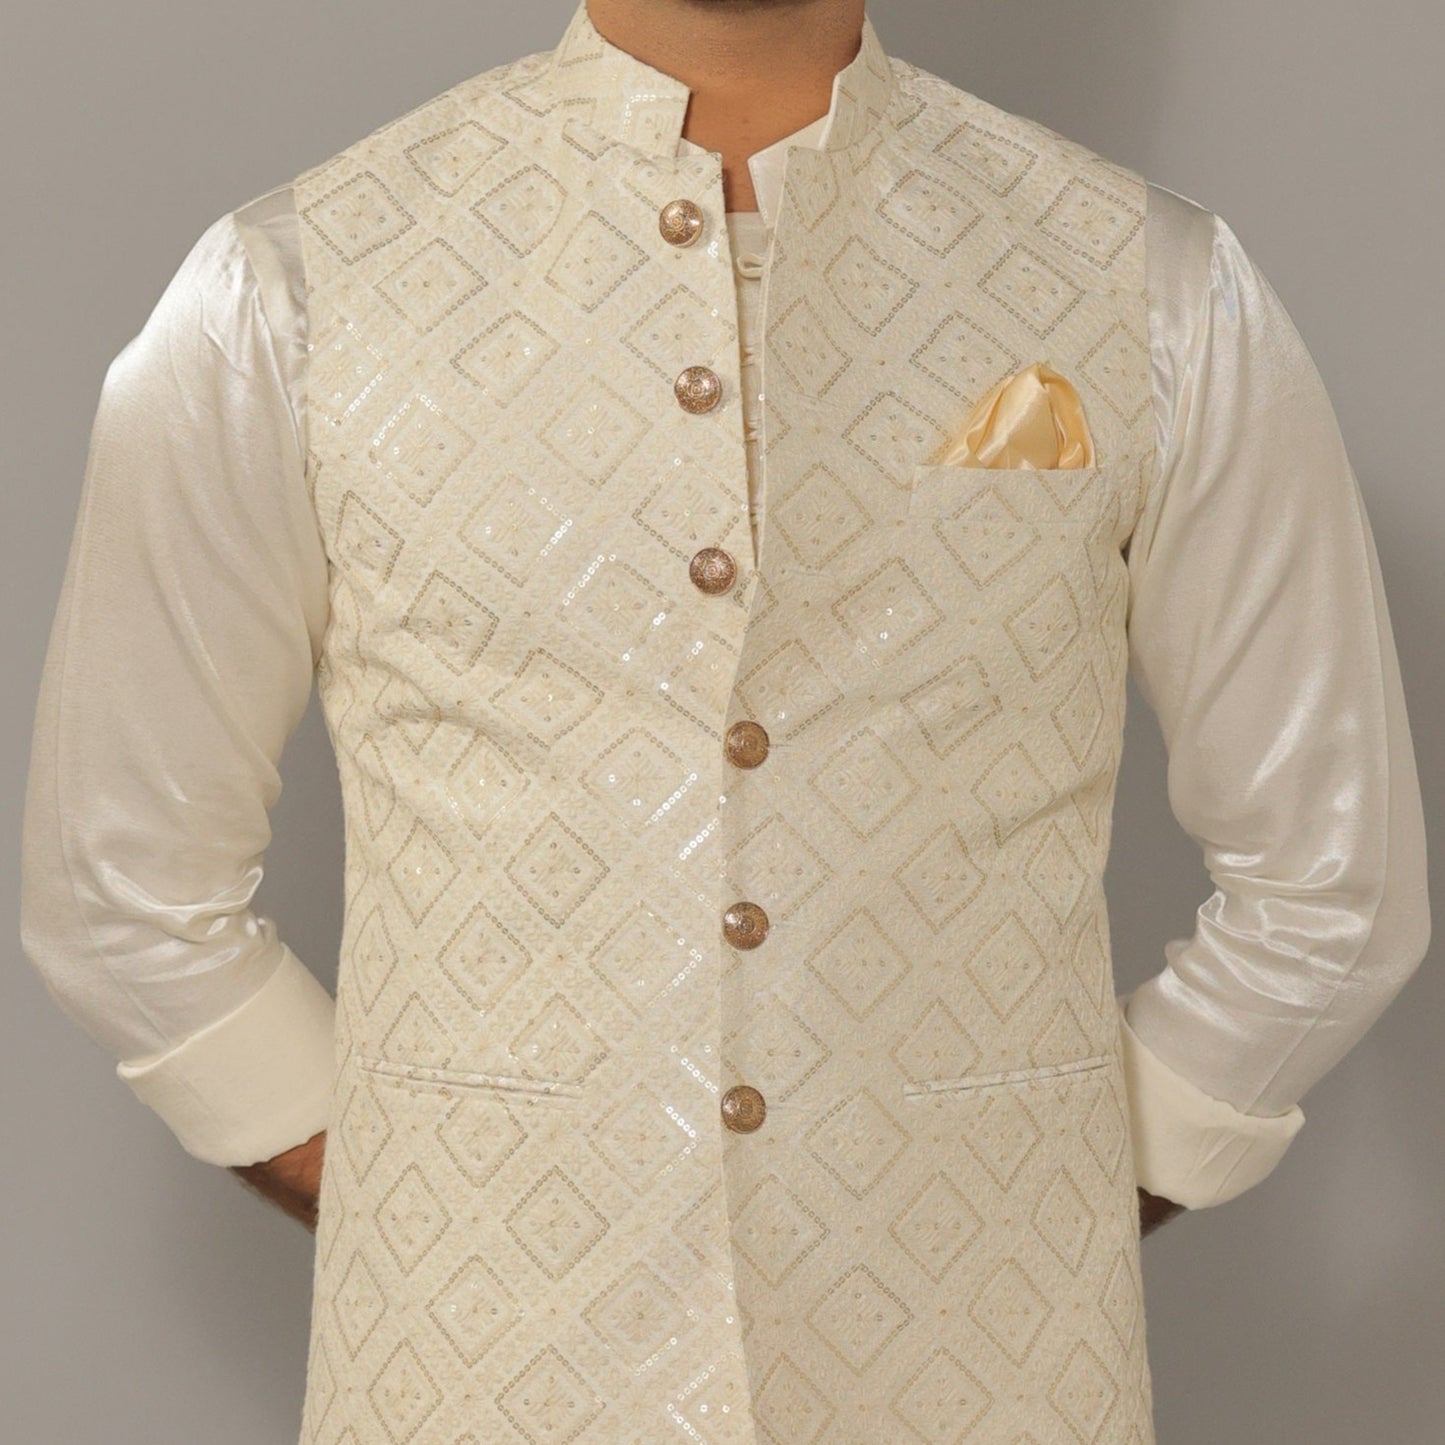 Off-White Kurta Pajama Set with Luckhnawi Embroidery White Color Nehru Jacket - Handcrafted